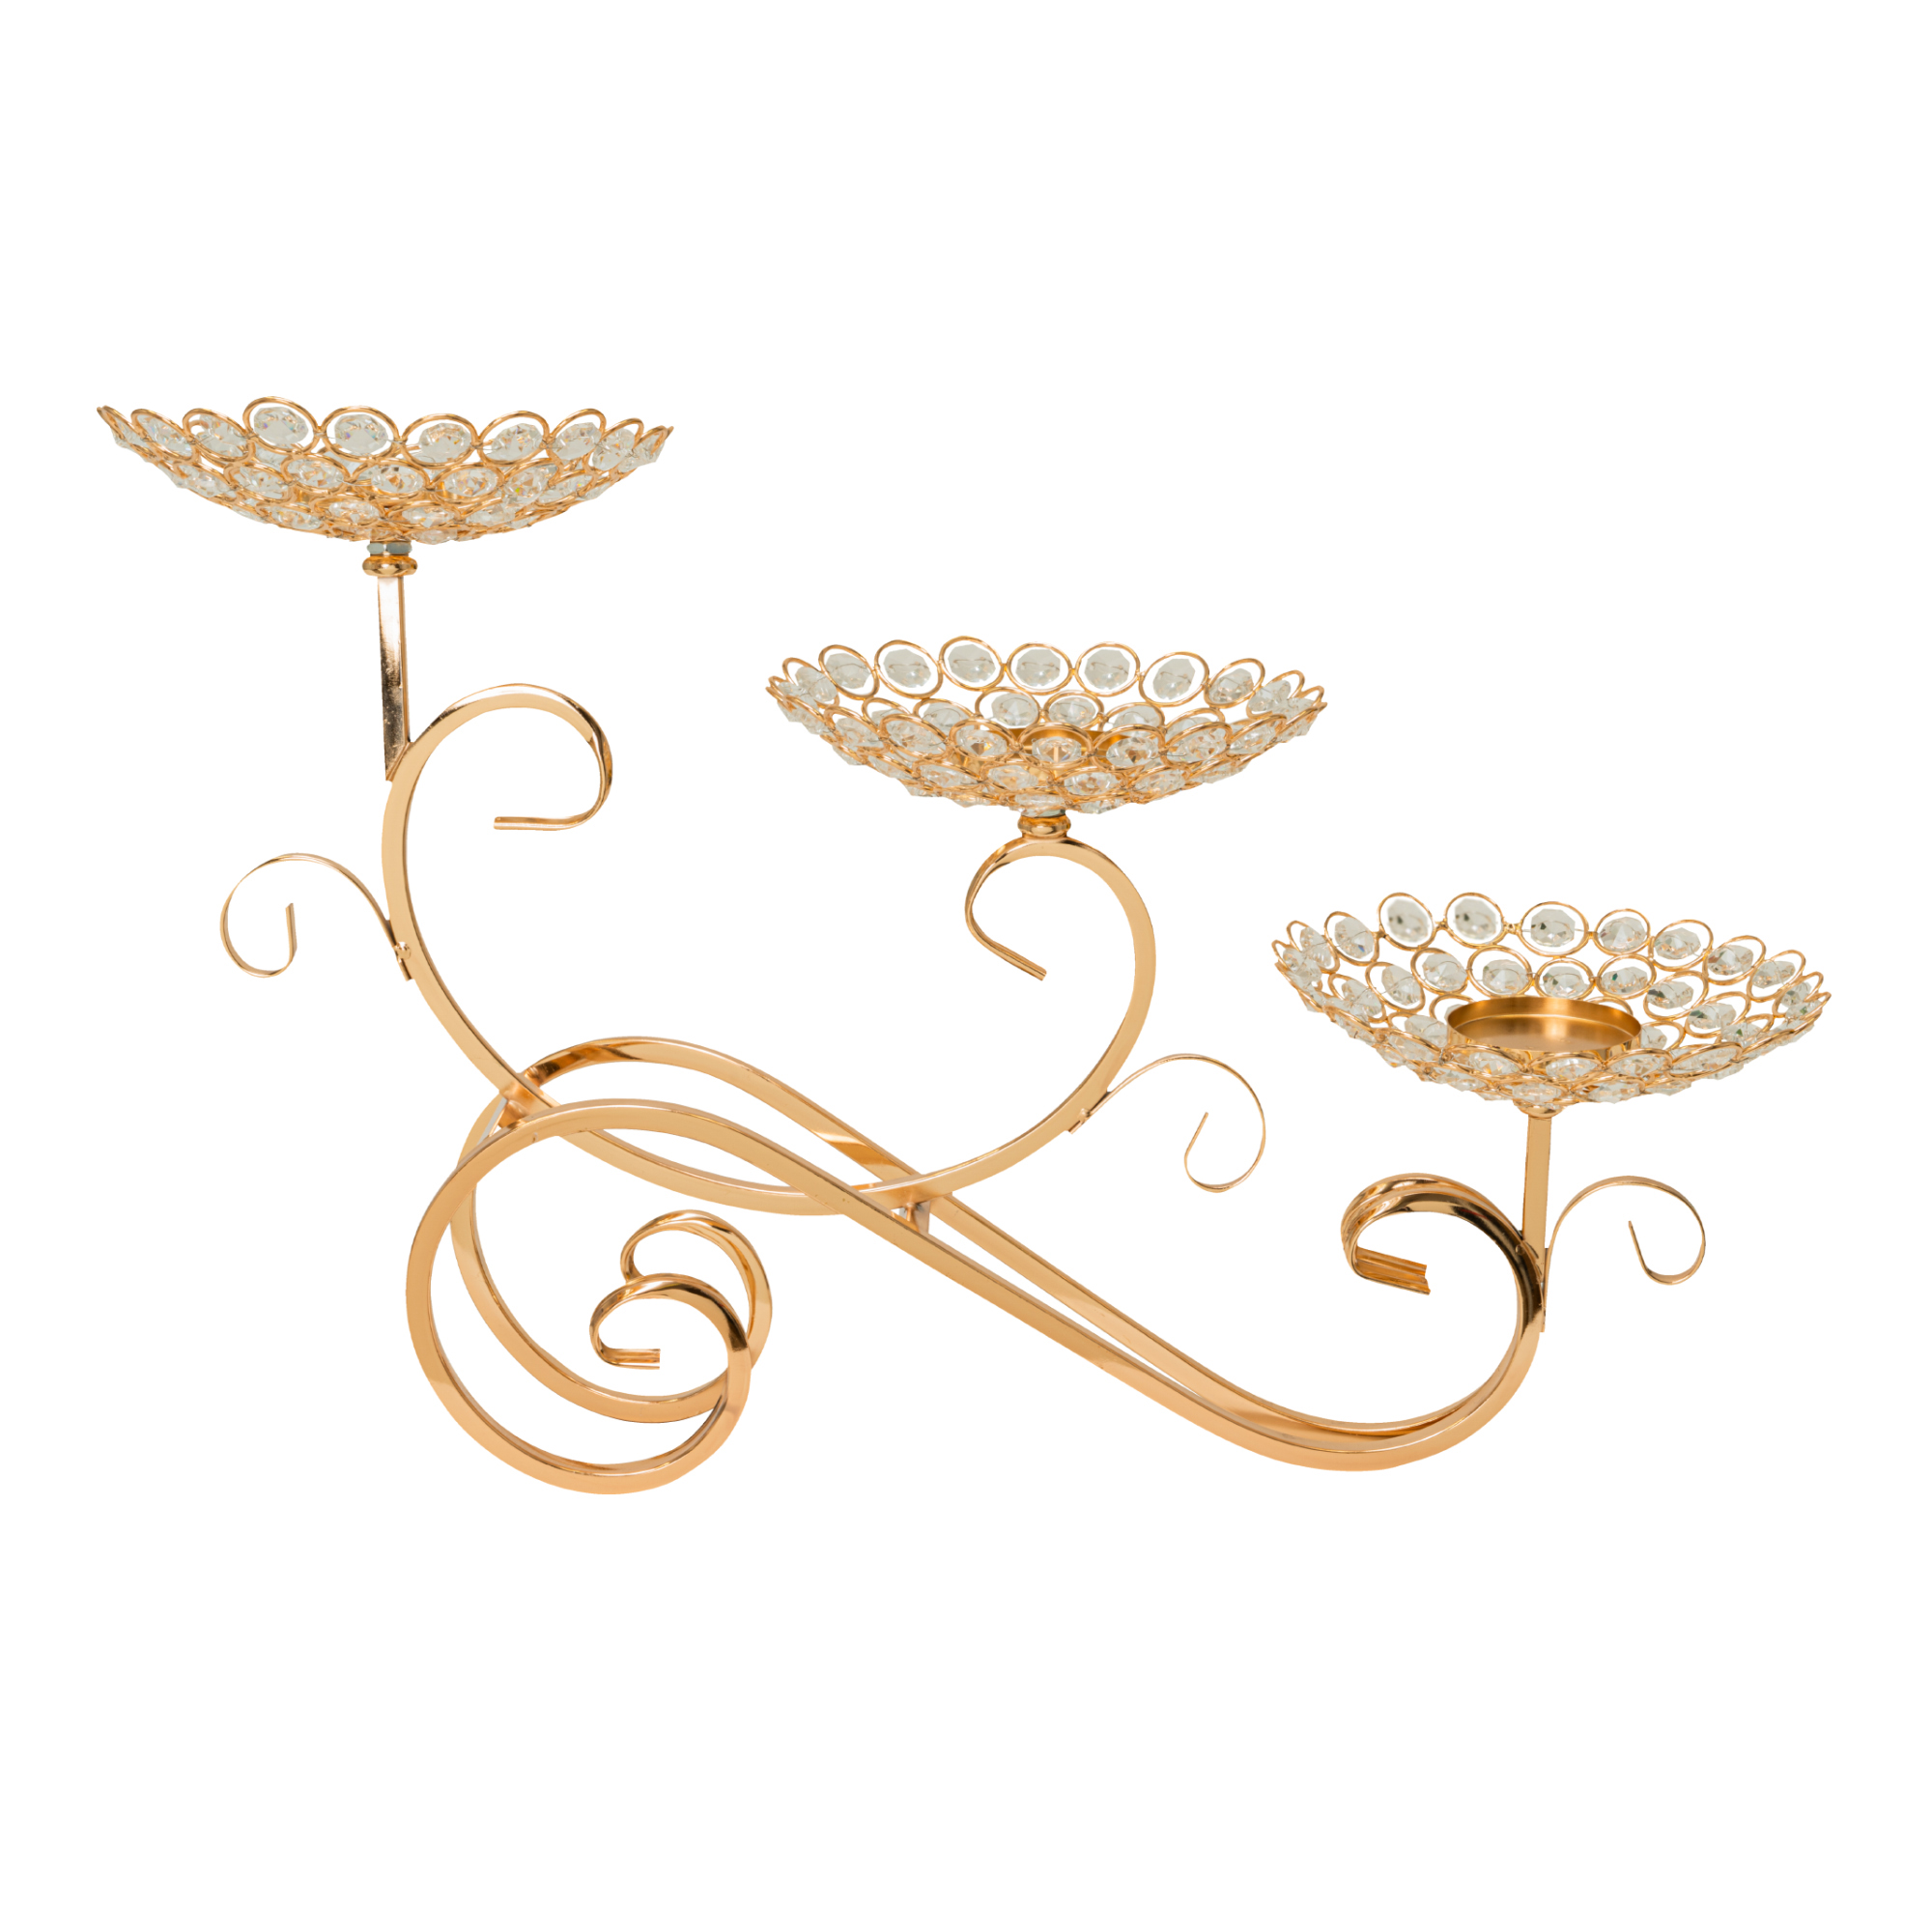 Crystal Bead Tabletop Low Candelabra - Gold